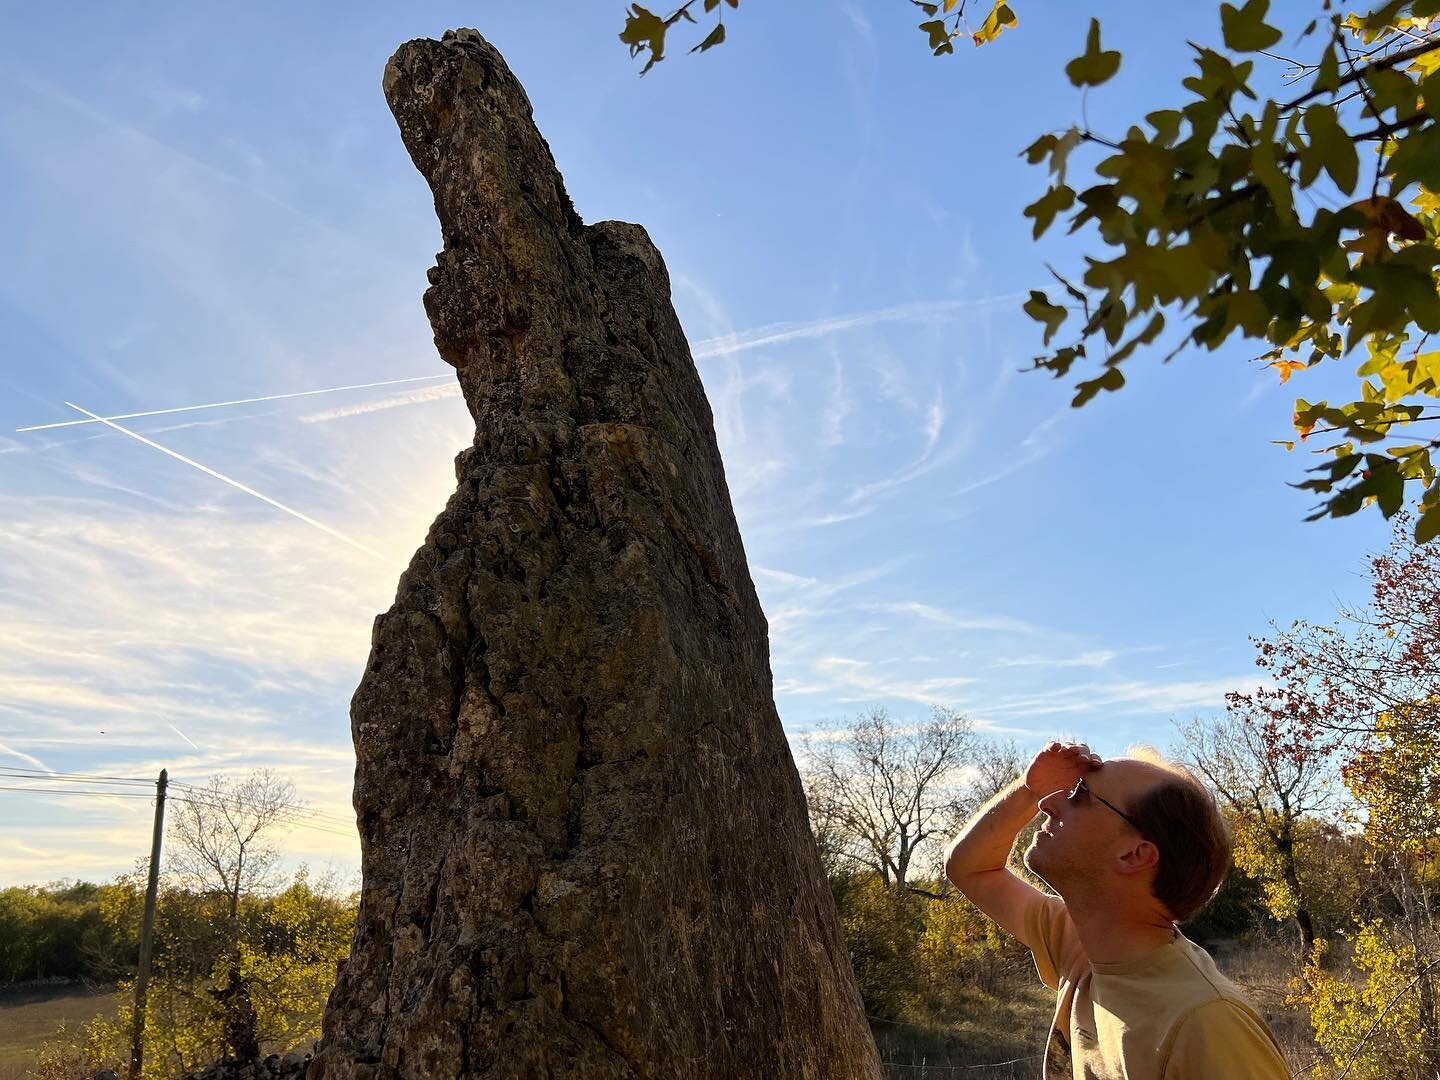 Something new is coming soon from The Prehistoric Tourist. Stay tuned! 

#history #prehistory #neolithic #paleo #paleolithic #youtube #prehistorictourist #megalith #menhir #standingstones